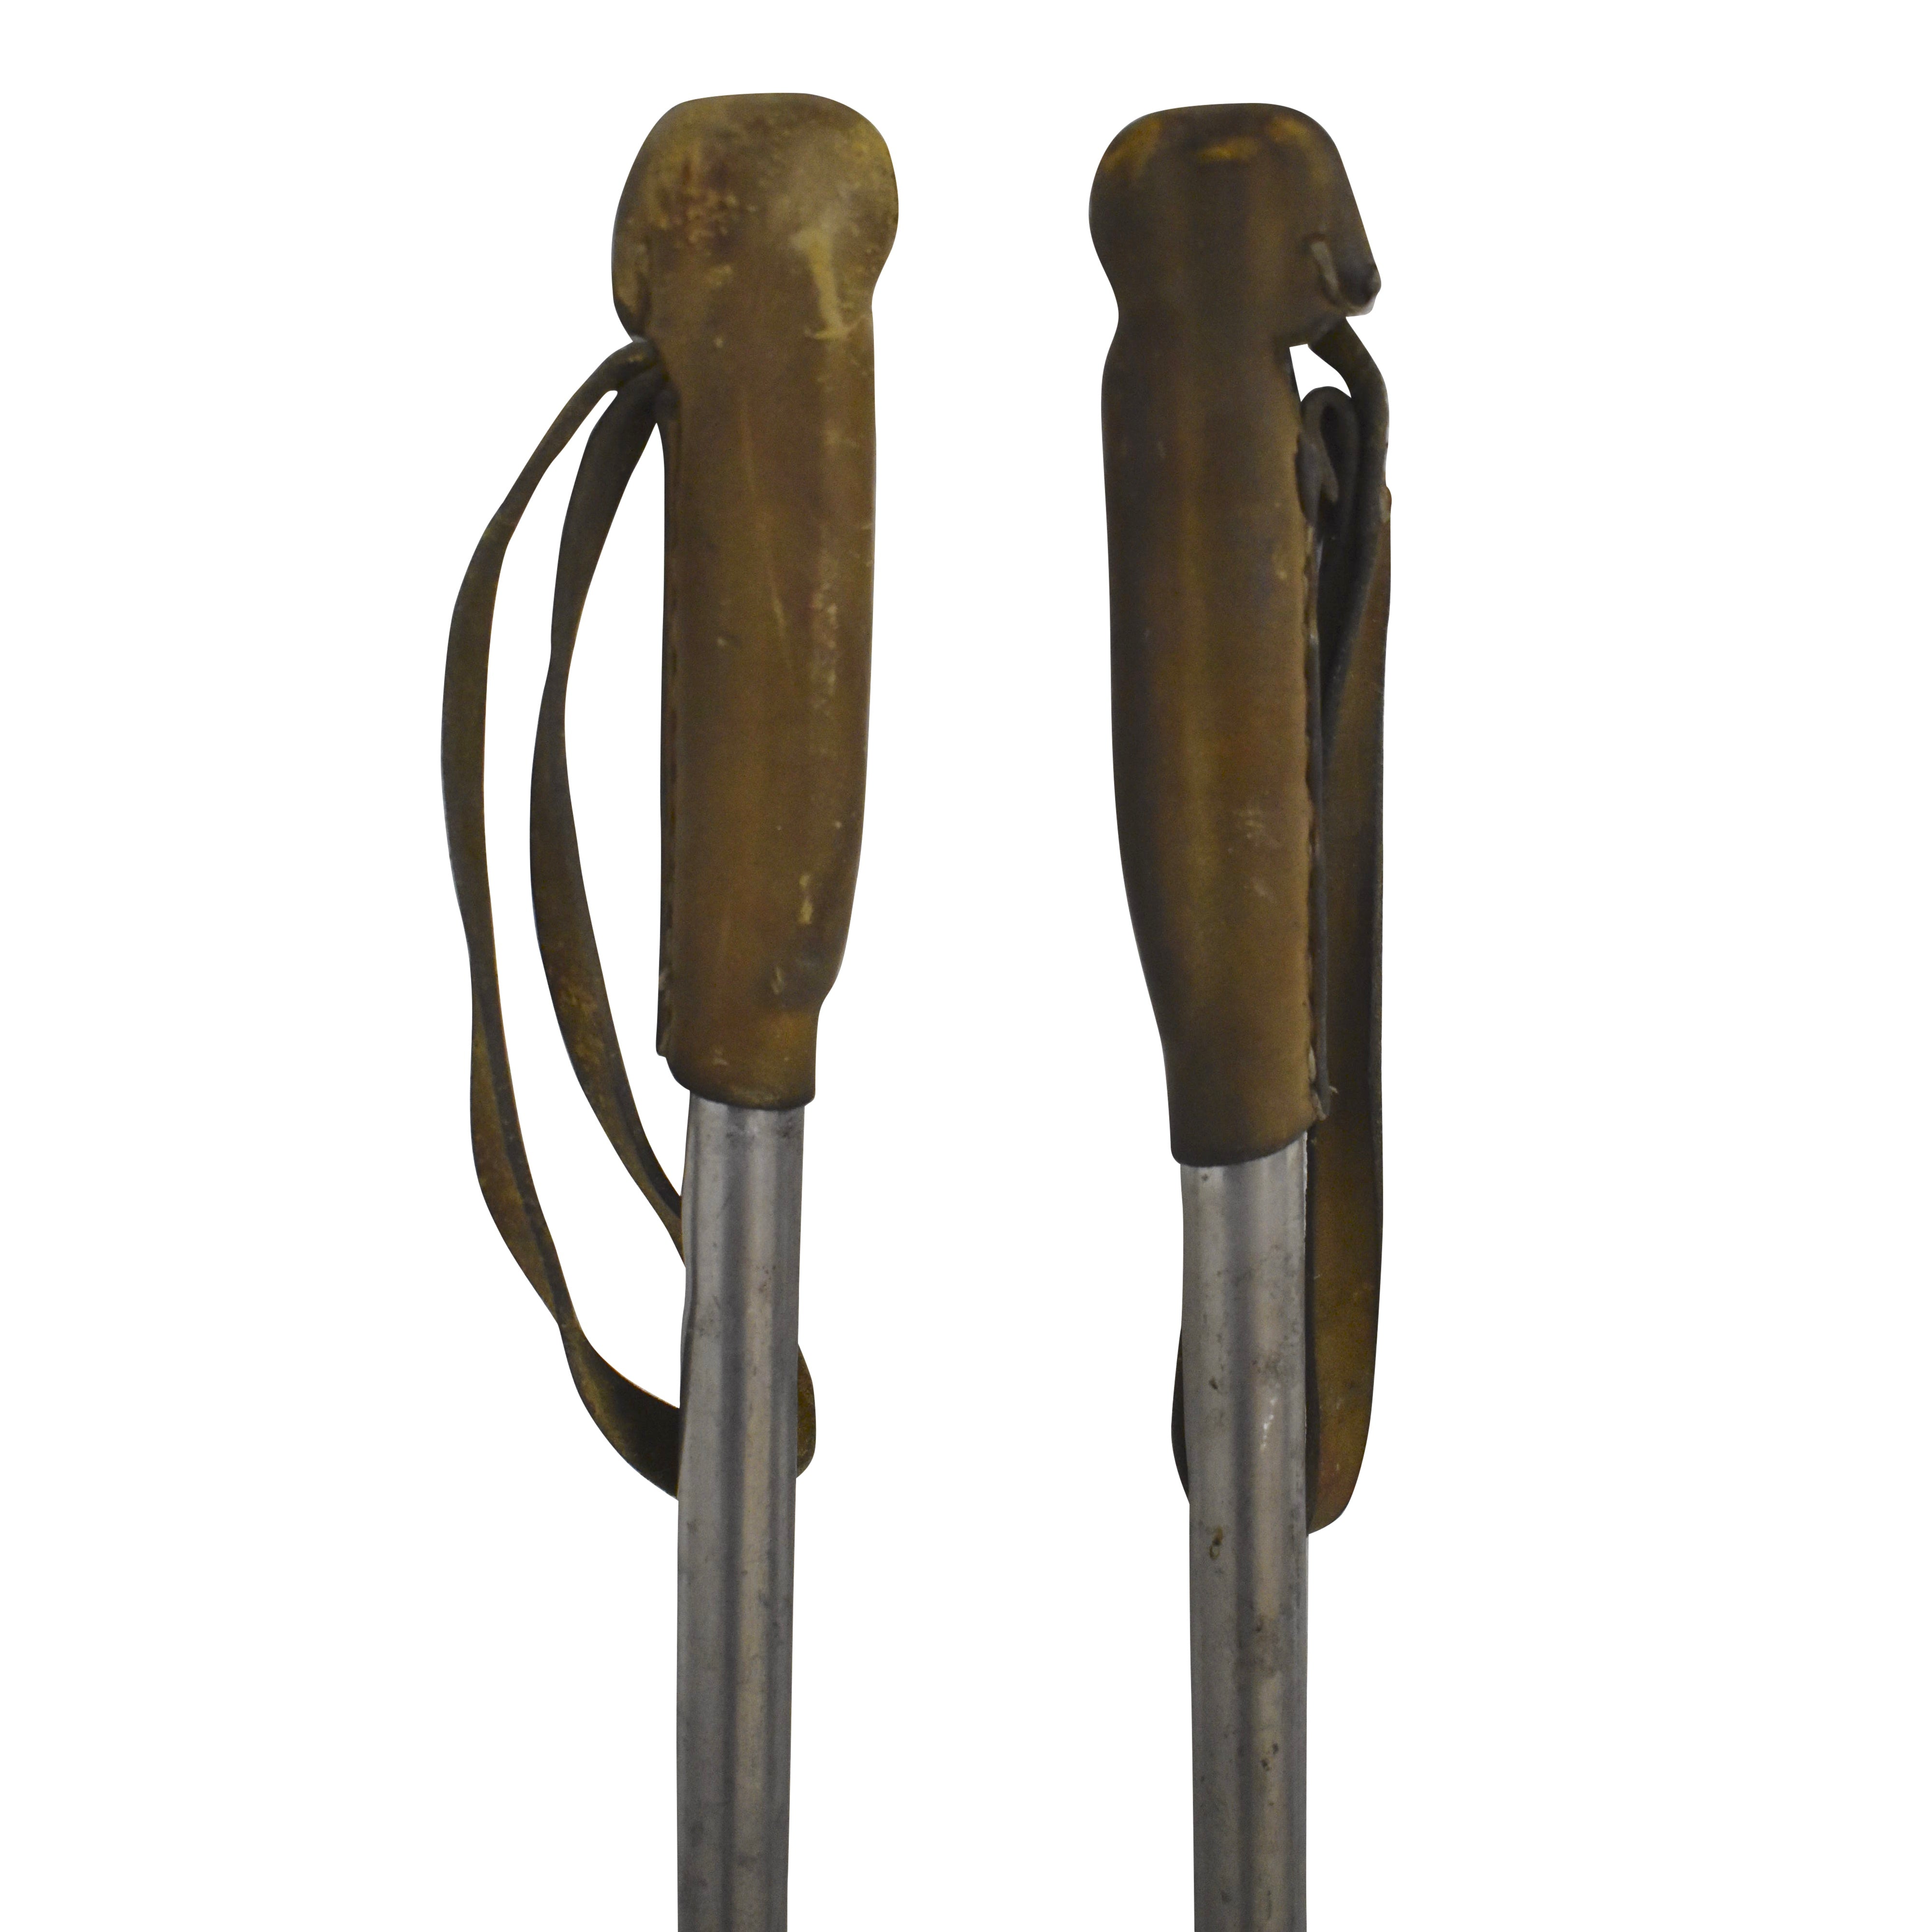 Aluminum Ski Poles with Leather Grips